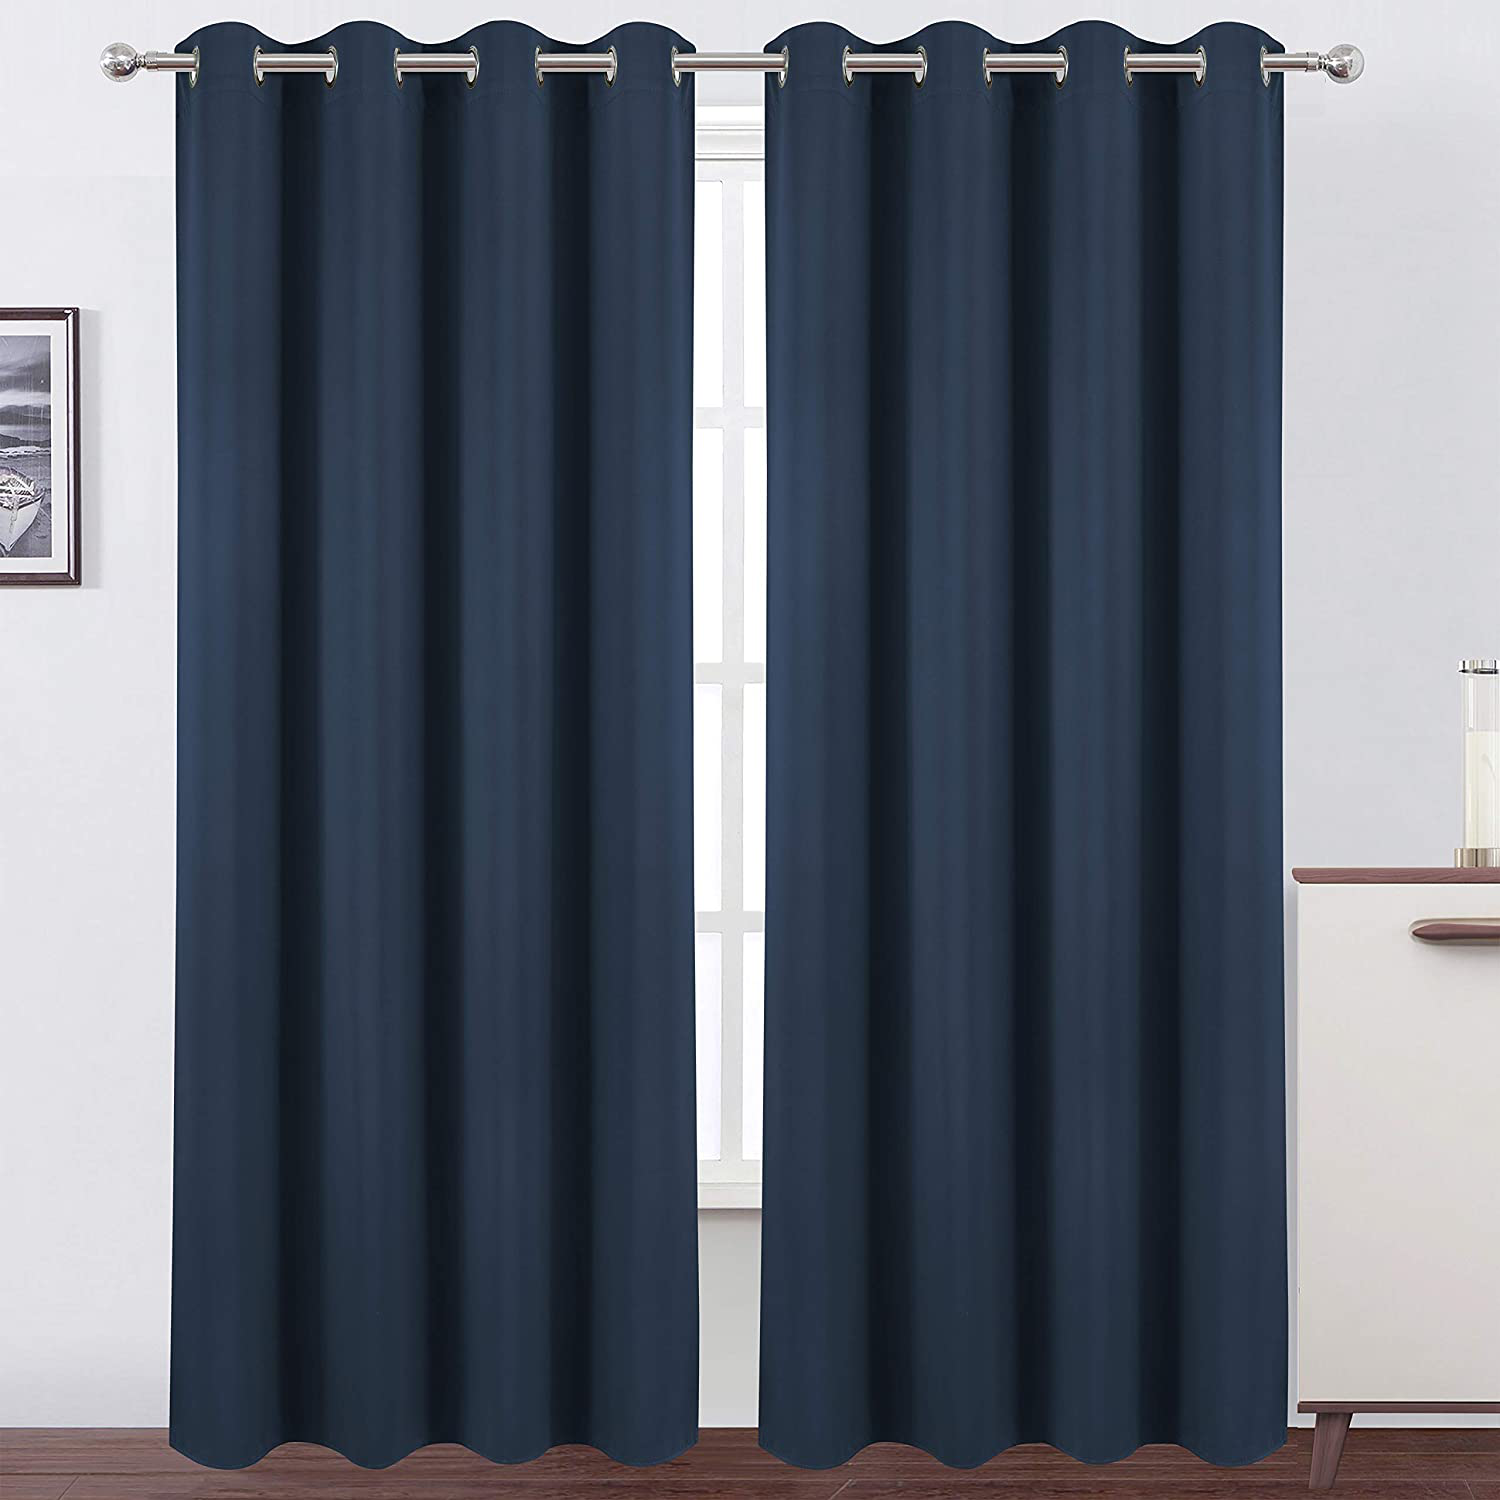 LEMOMO Navy Blue Thermal Blackout Curtains/52 x 108 Inch/Set of 2 Panels Room Darkening Curtains for Bedroom